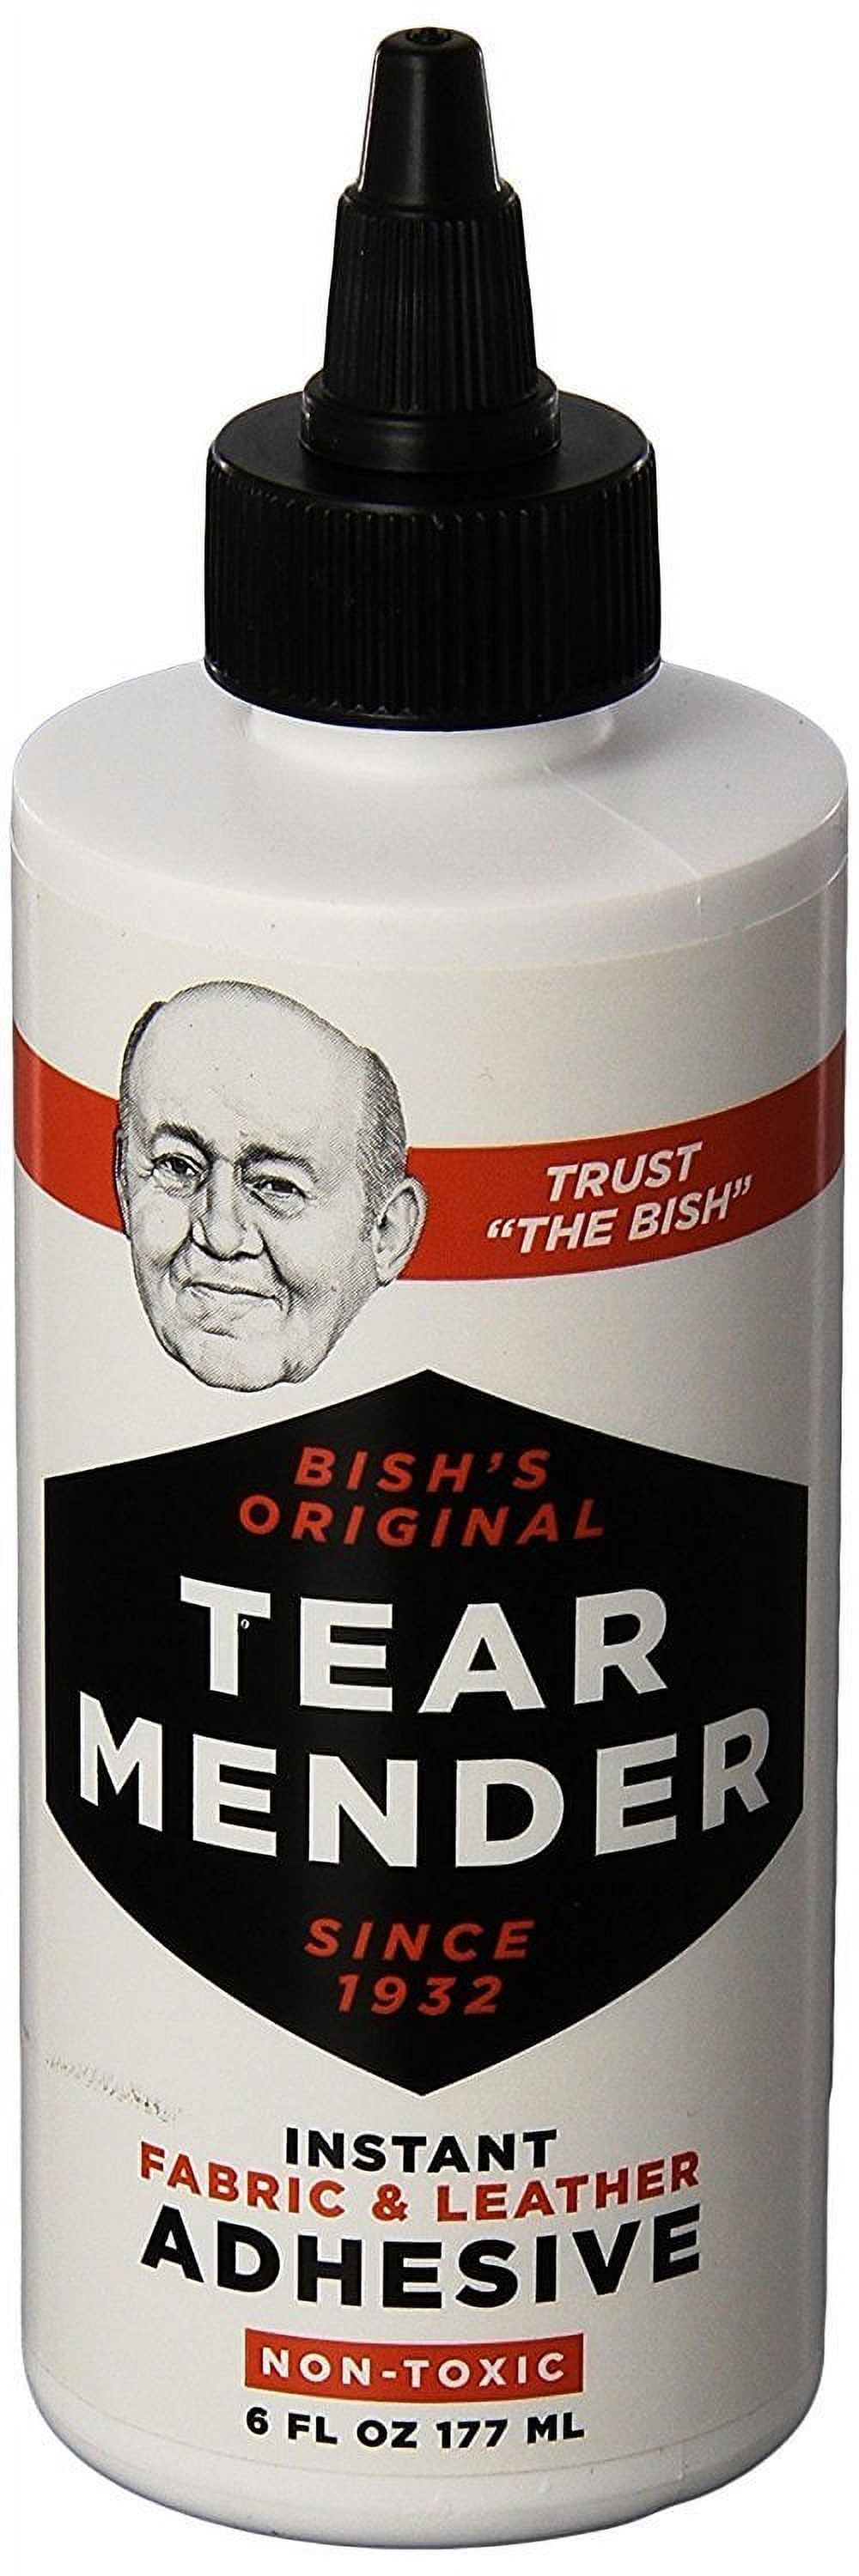 Tear Mender Instant Fabric and Leather Adhesive, 6 oz. Bottle, 12 Pack,  TG-6H-C12 